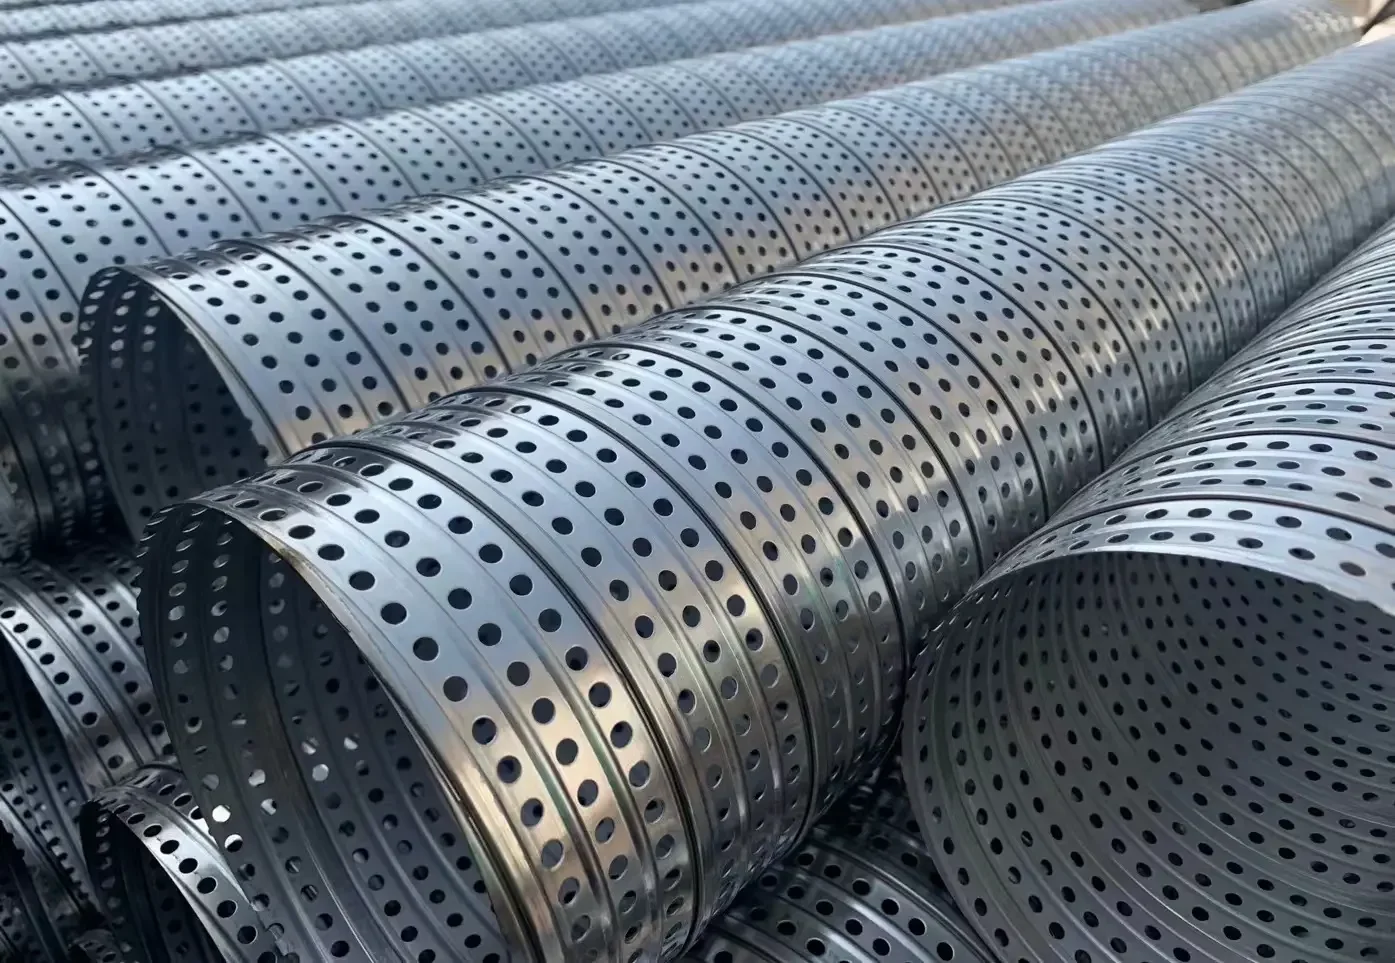 Spiral Welded Perforated Tubes